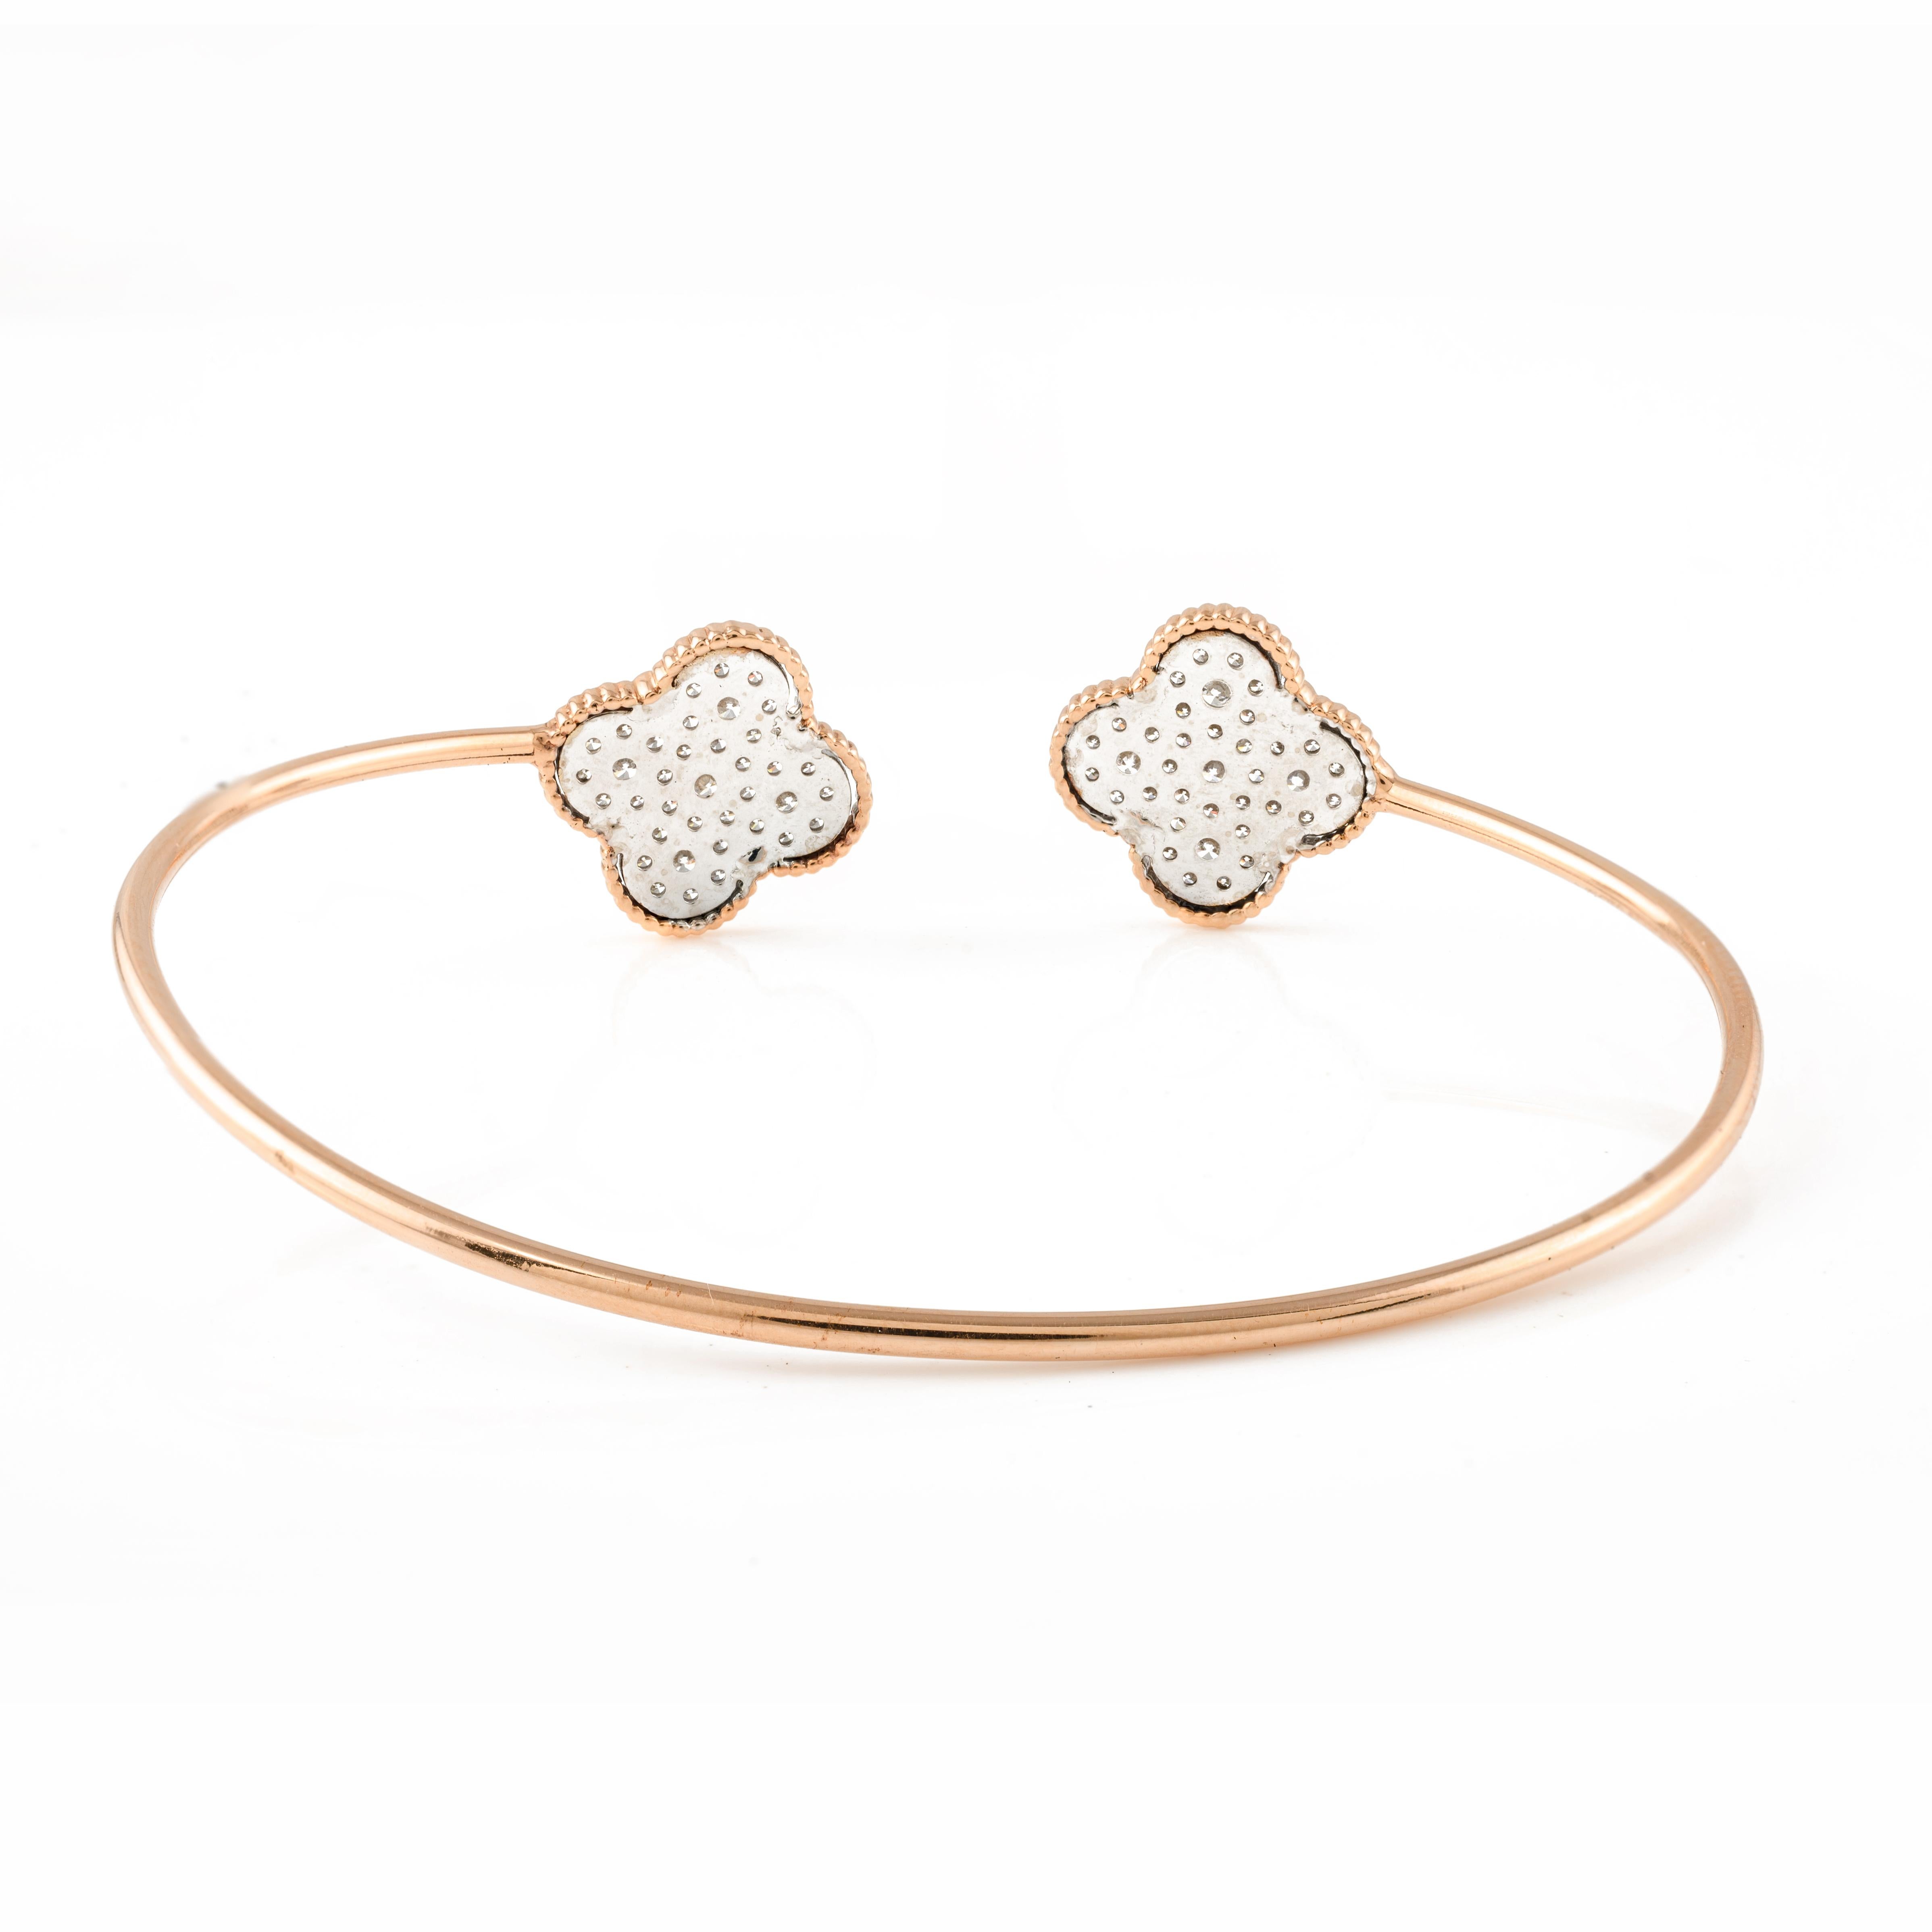 Round Cut Clover Diamond Cuff Bracelet 18k Solid Rose Gold, Christmas Gift For Her For Sale